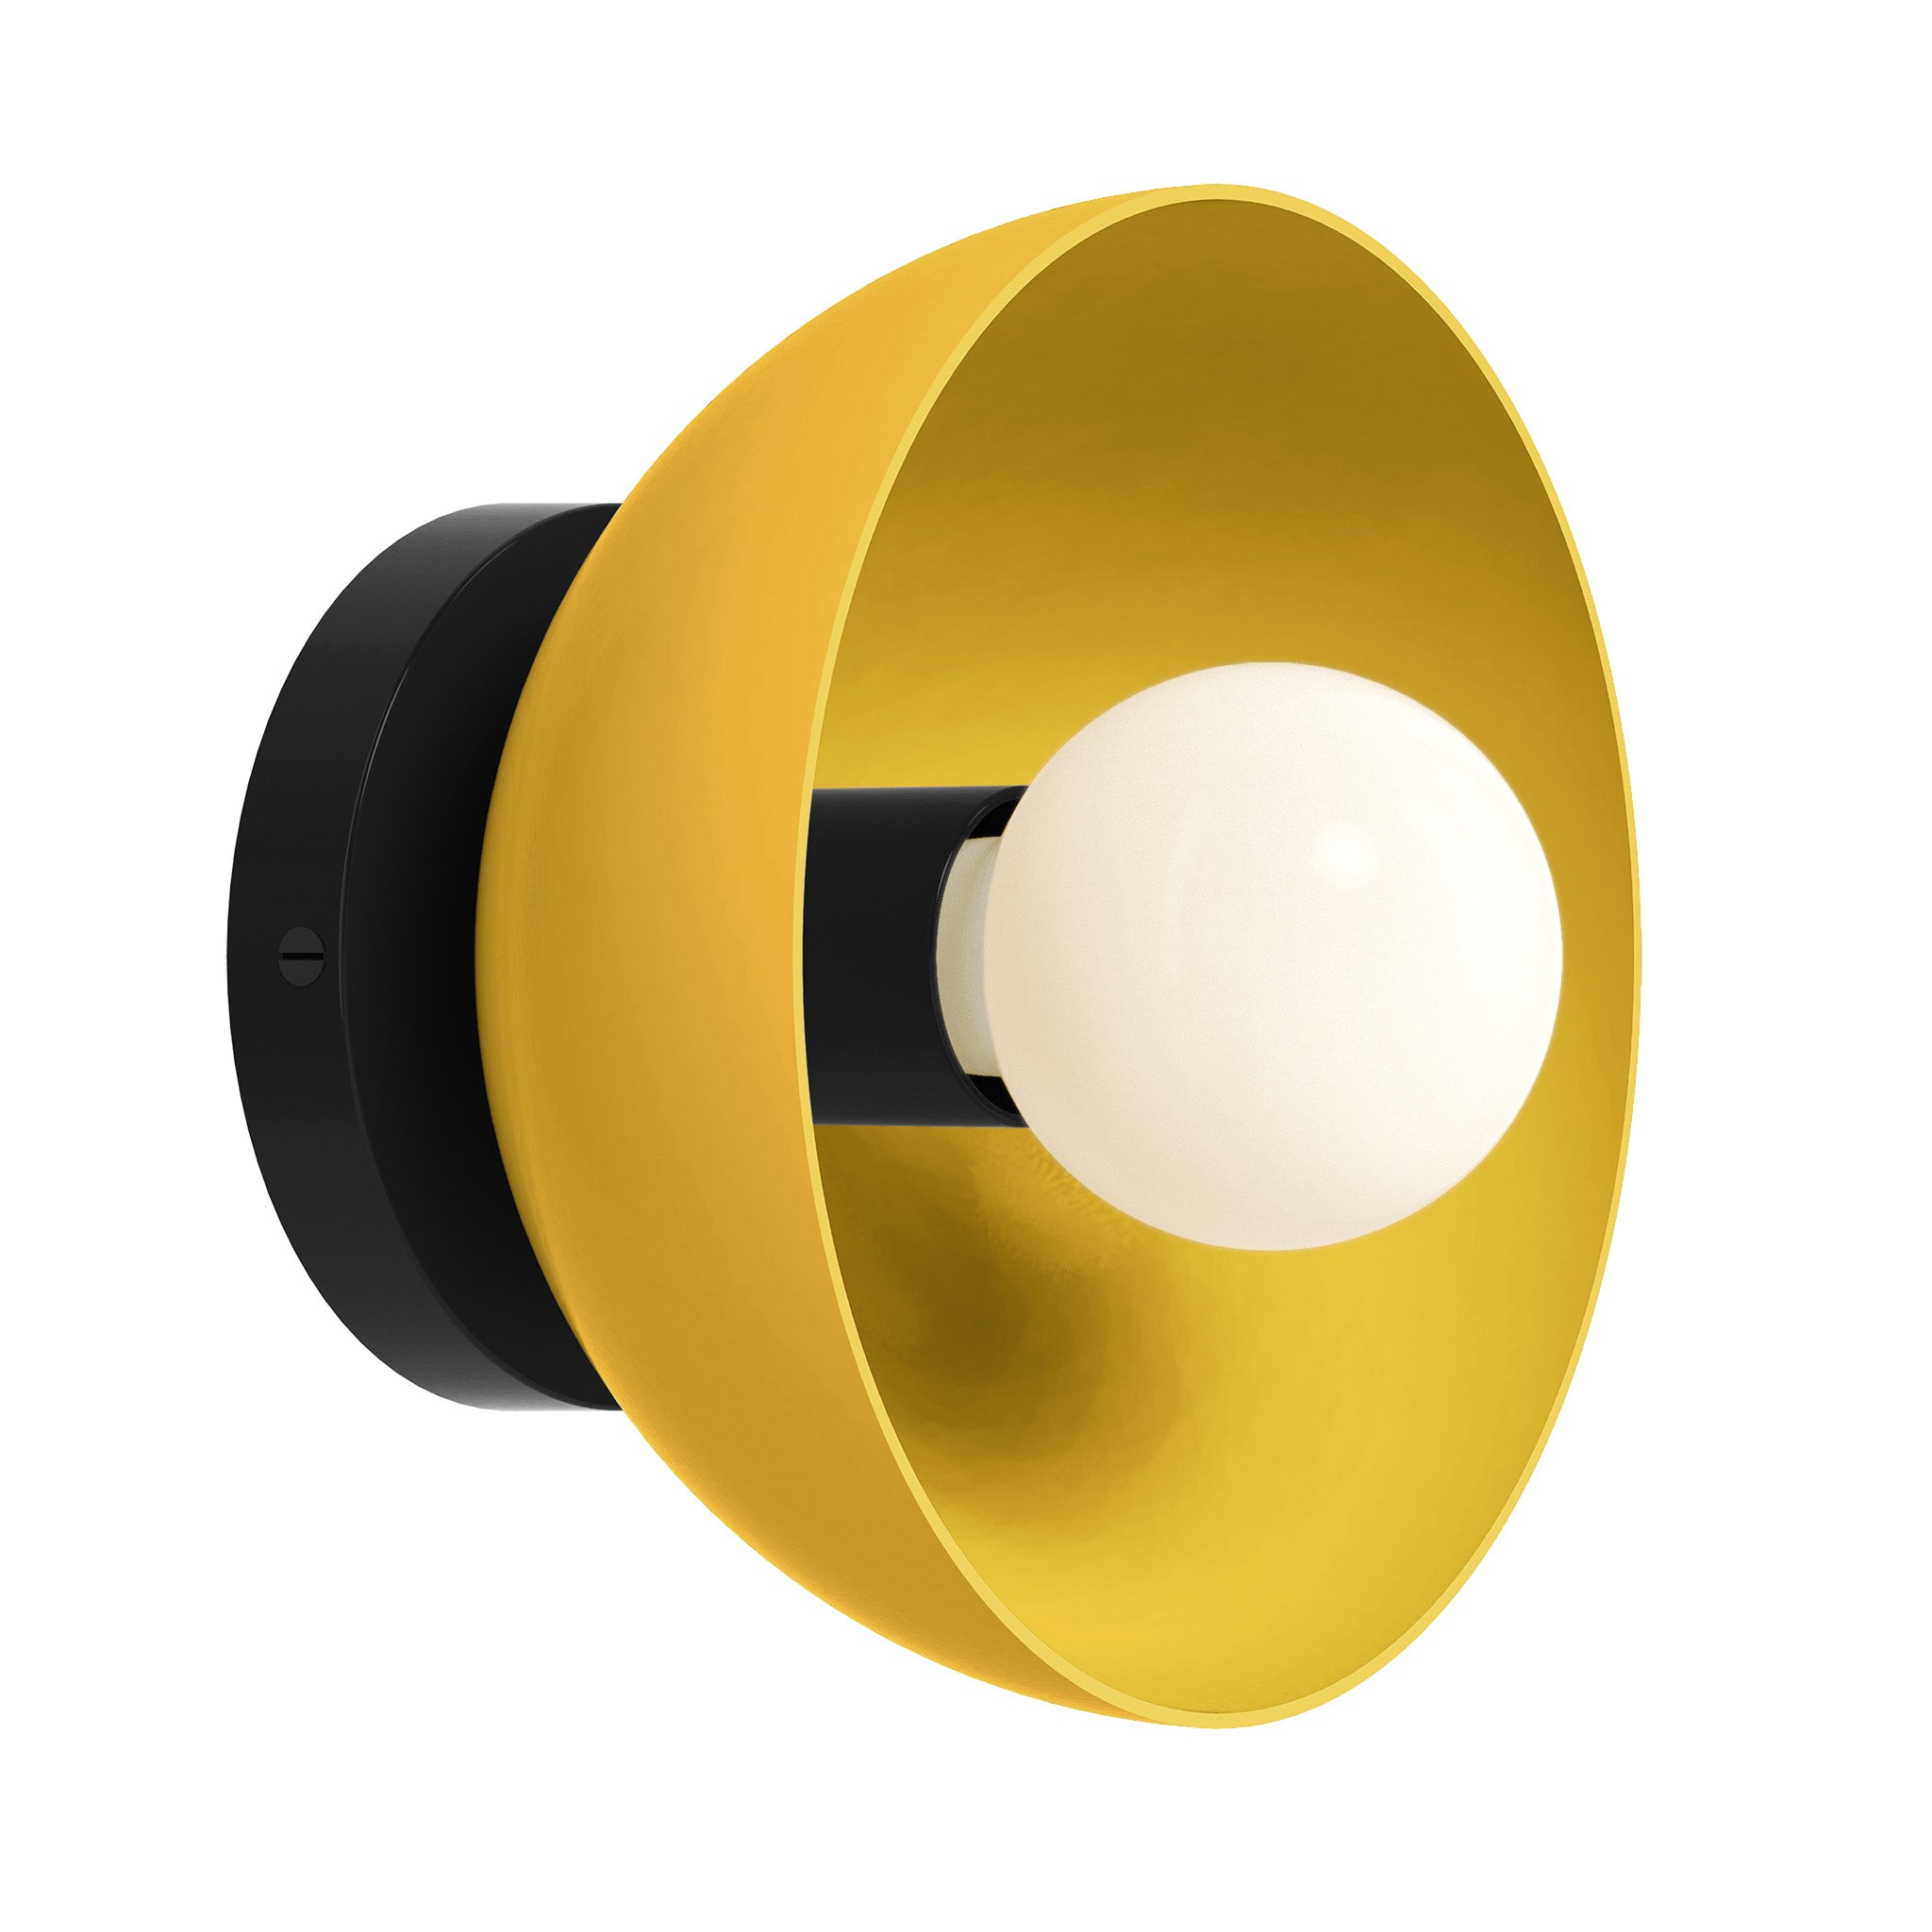 Black and ochre color Hemi sconce 8" Dutton Brown lighting